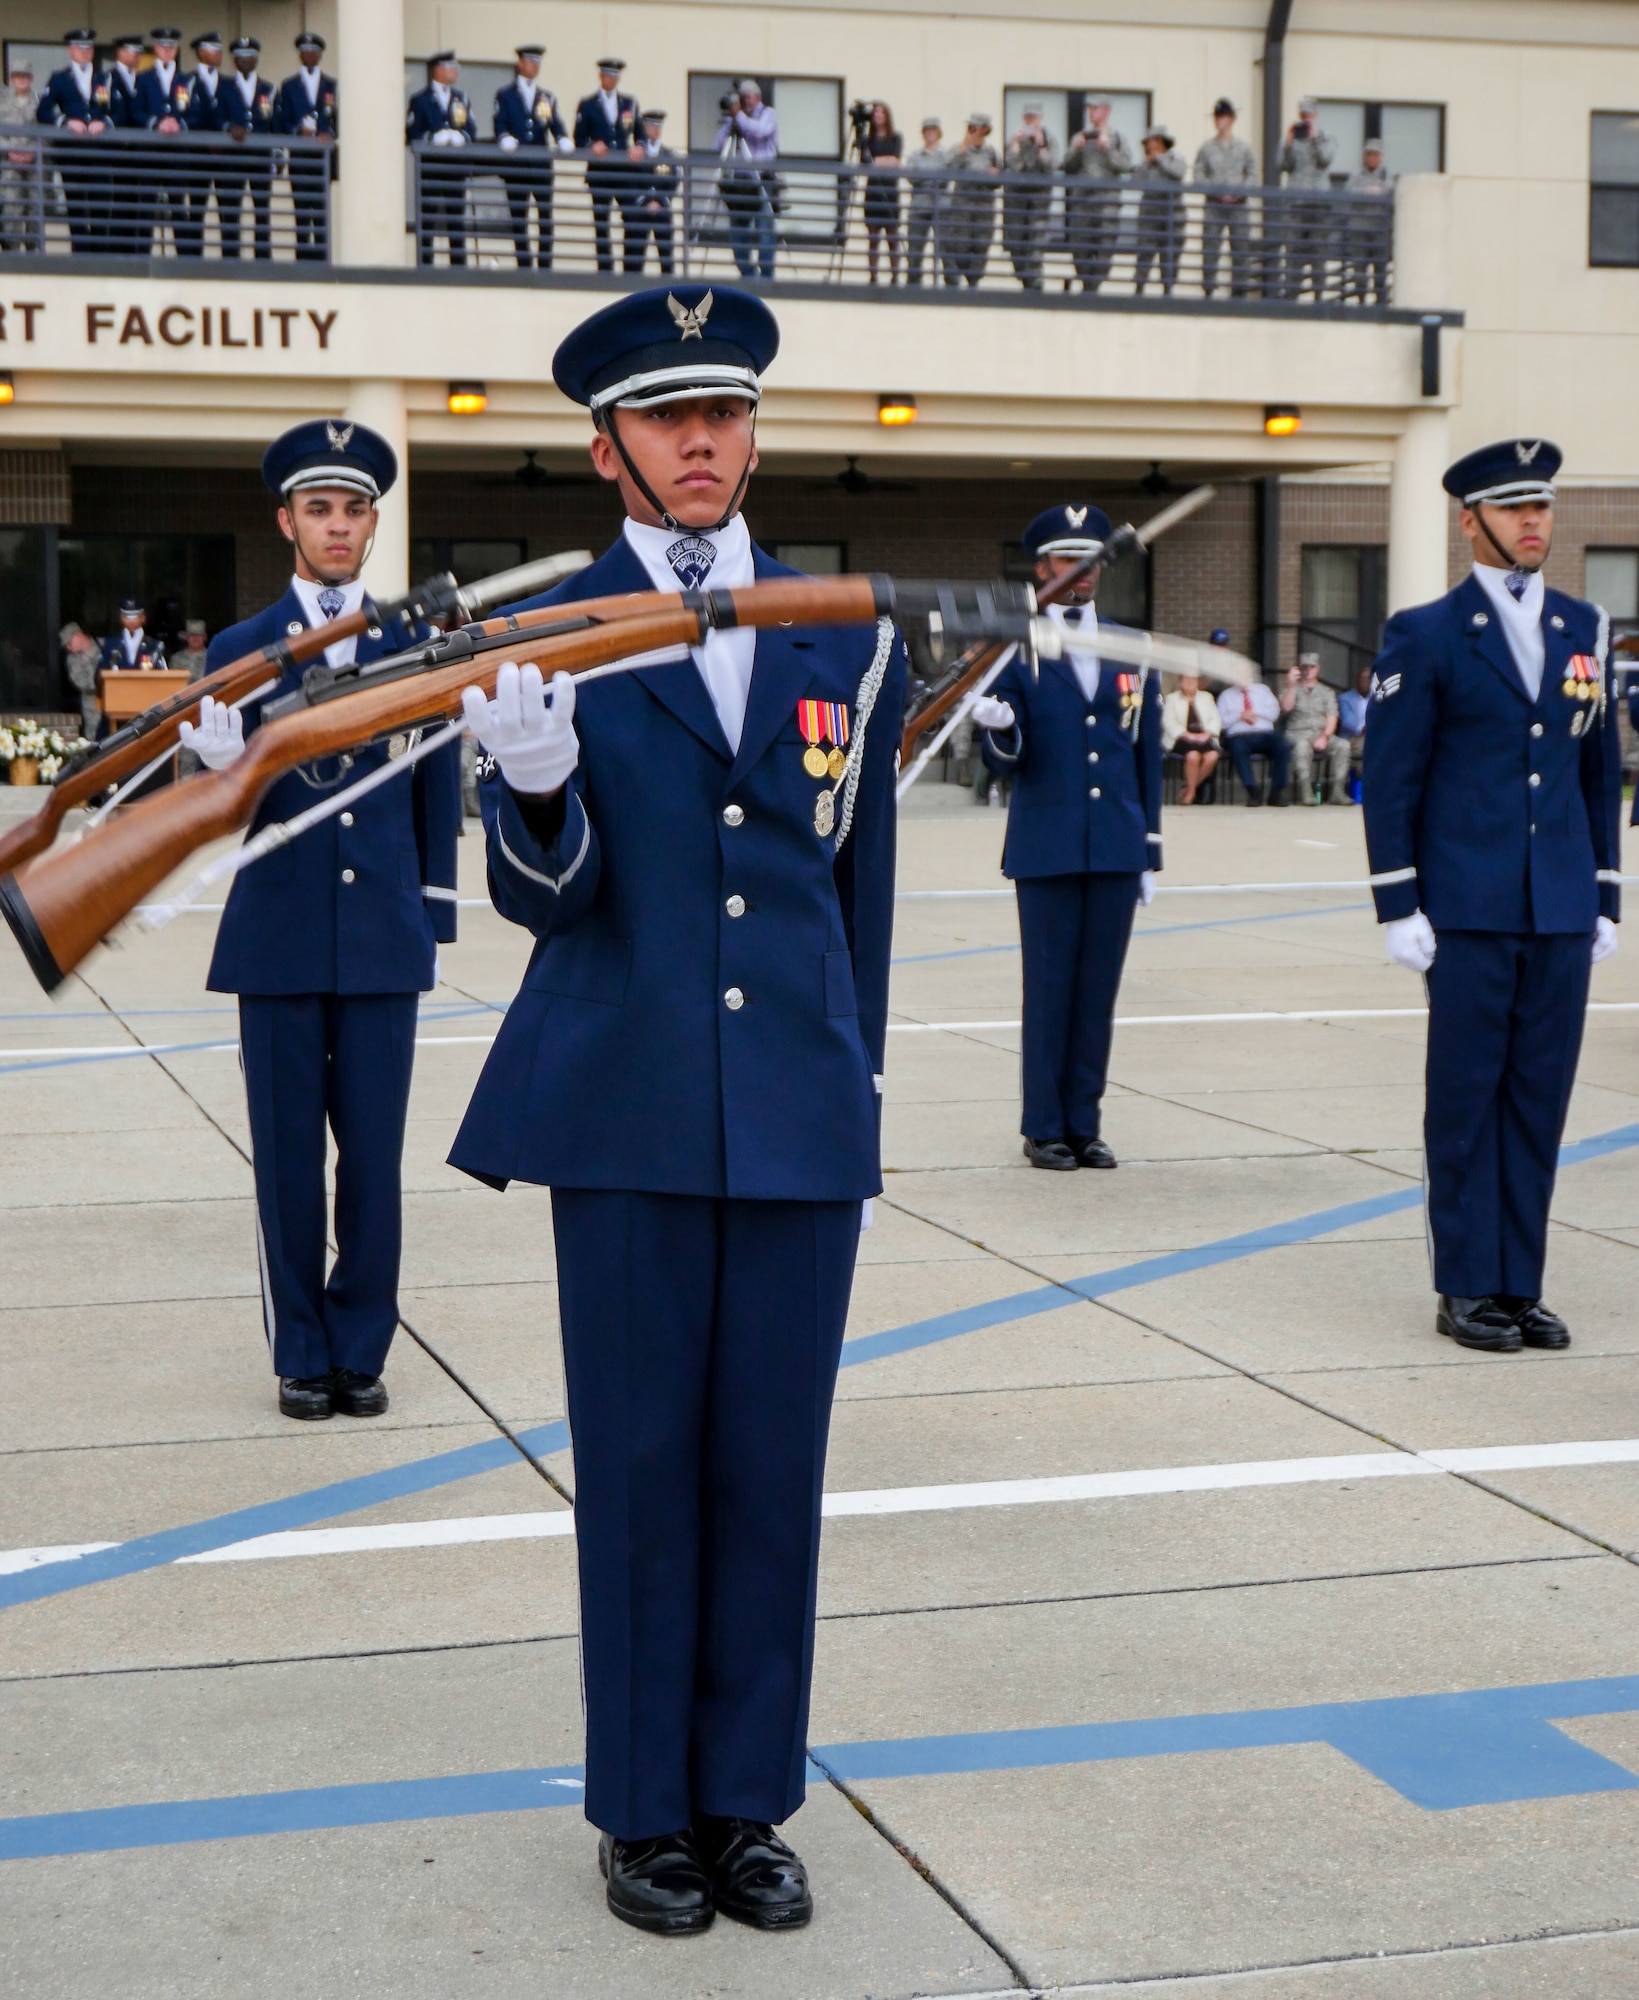 The U.S. Air Force Honor Guard Drill Team debuts their 2017 routine during the 81st Training Group drill down at the Levitow Training Support Facility drill pad March 10, 2017, on Keesler Air Force Base, Miss. The team comes to Keesler every year for five weeks to develop a new routine that they will use throughout the year. (U.S. Air Force photo by Capt. David J. Murphy)